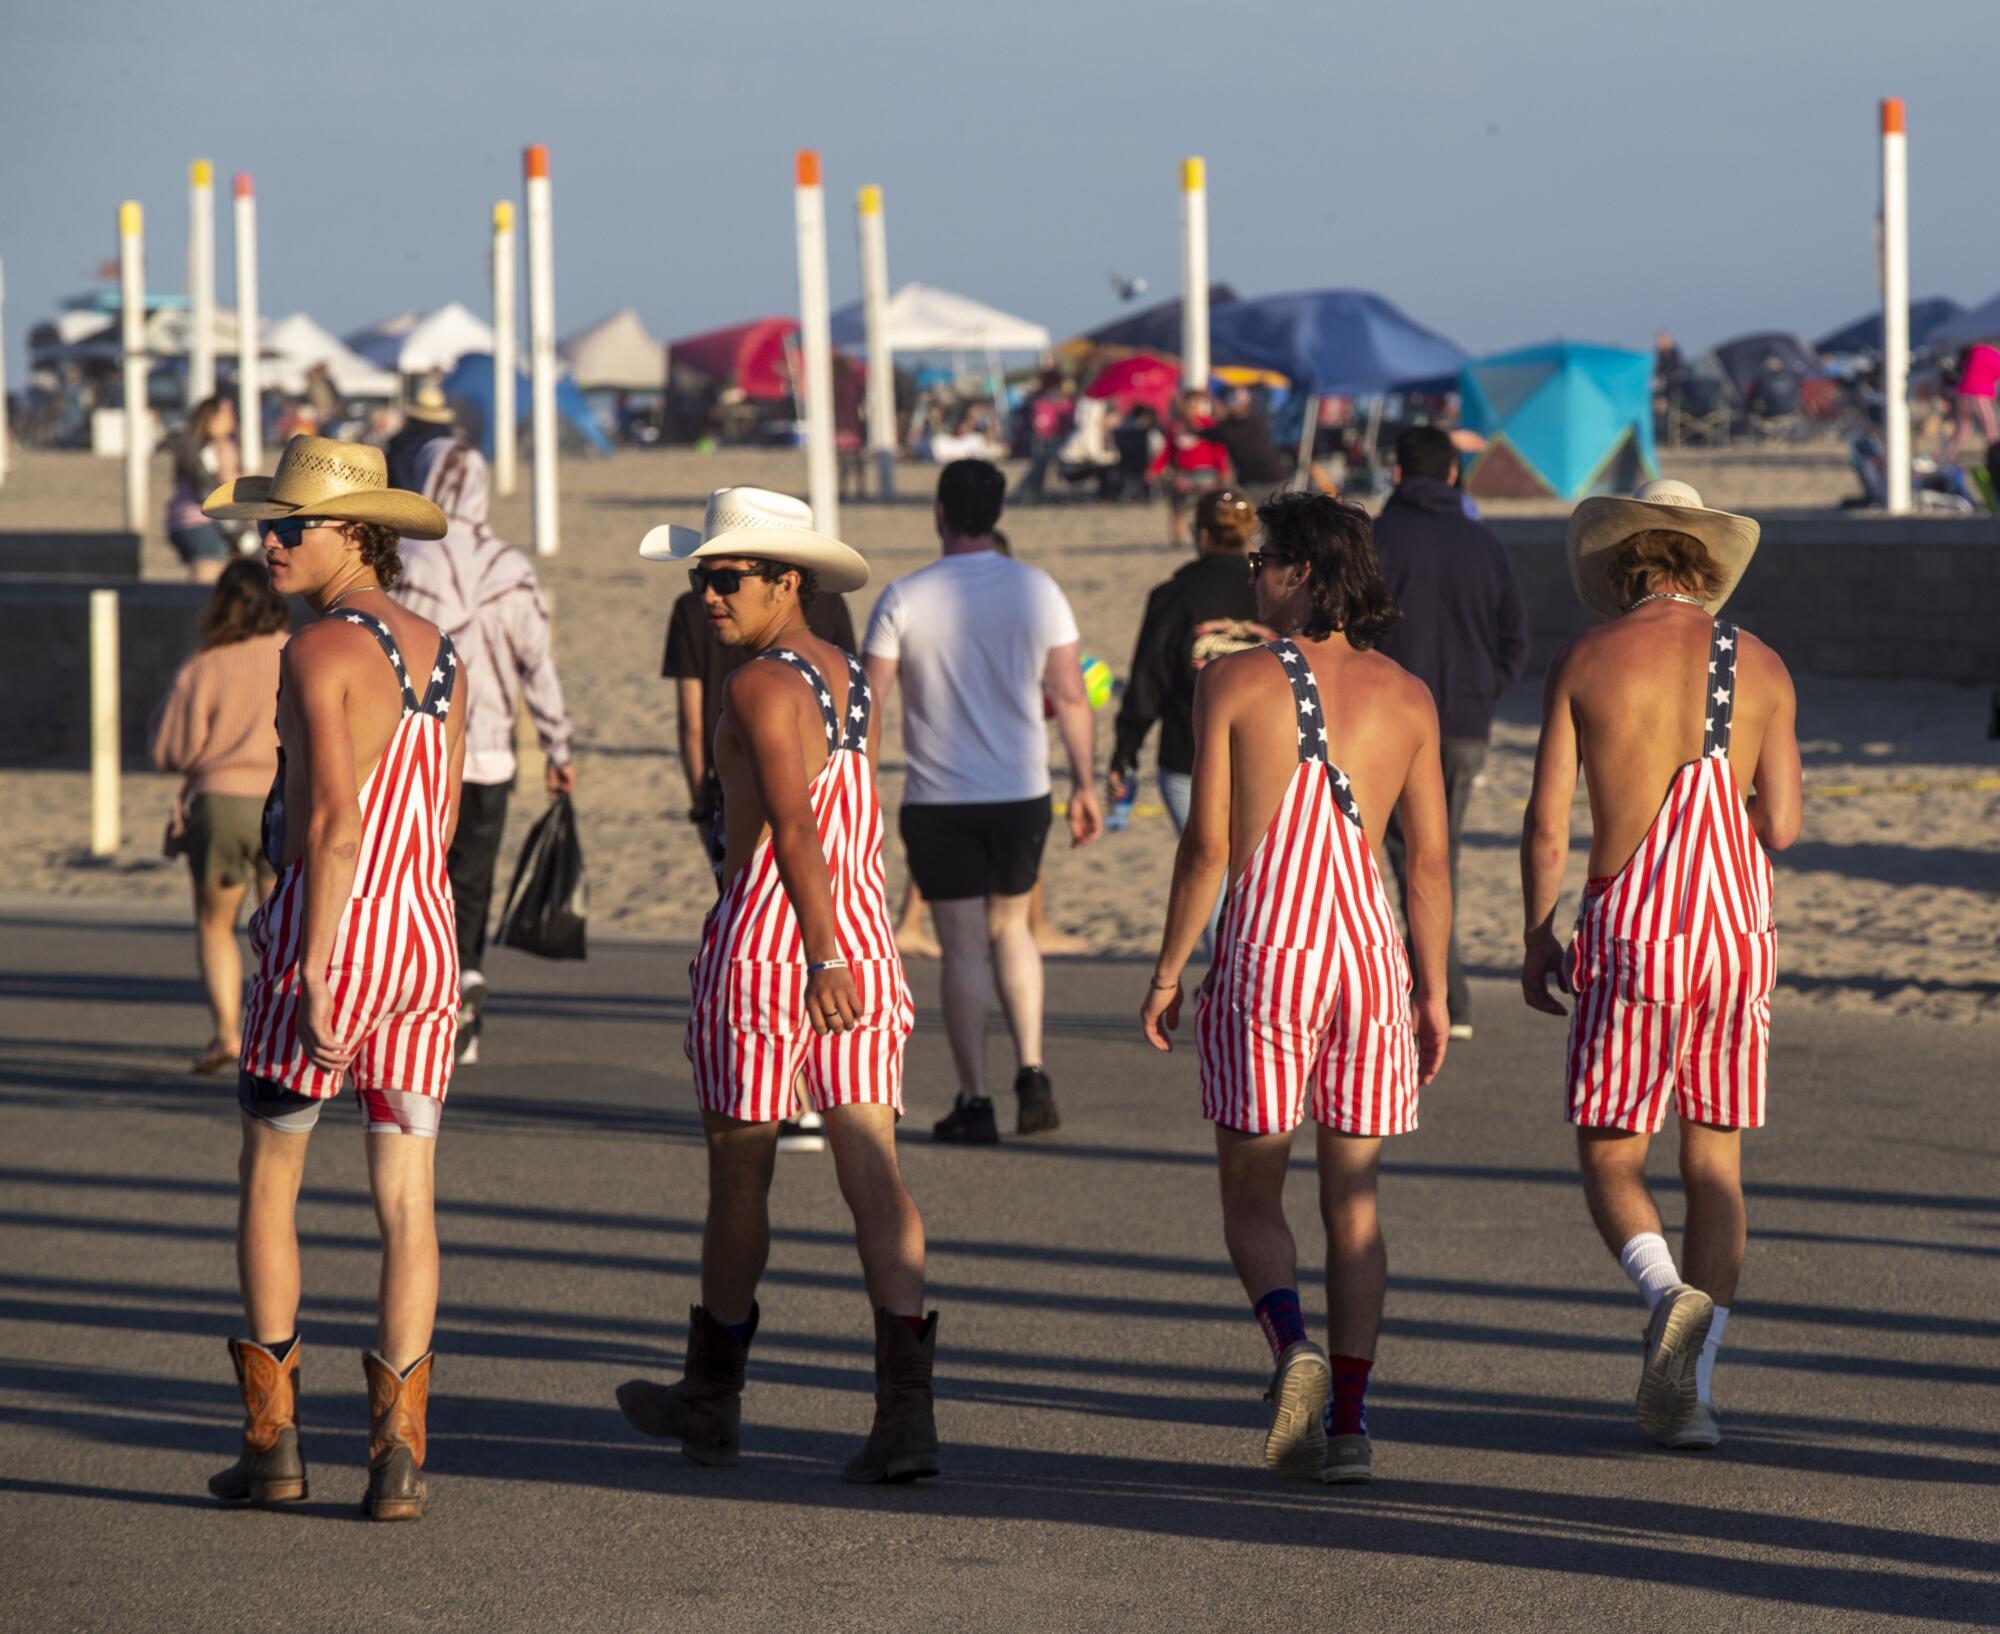 Four people wearing overalls in U.S. flag colors walk down a bike path 